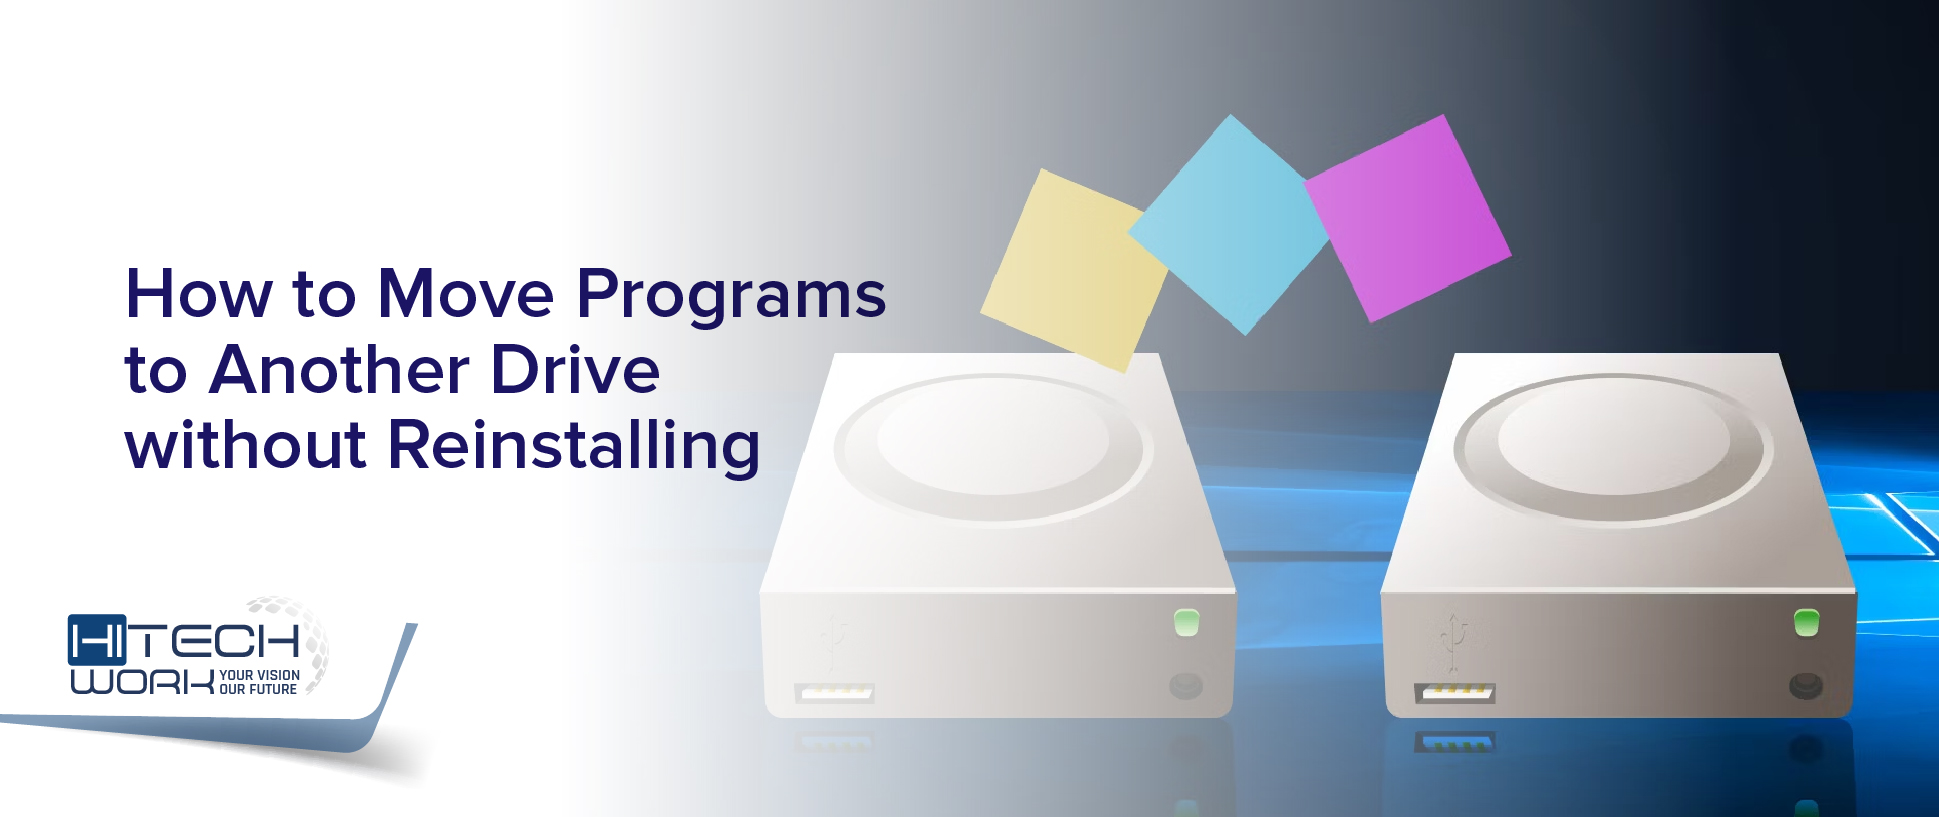 How to Move Programs to Another Drive without Reinstalling